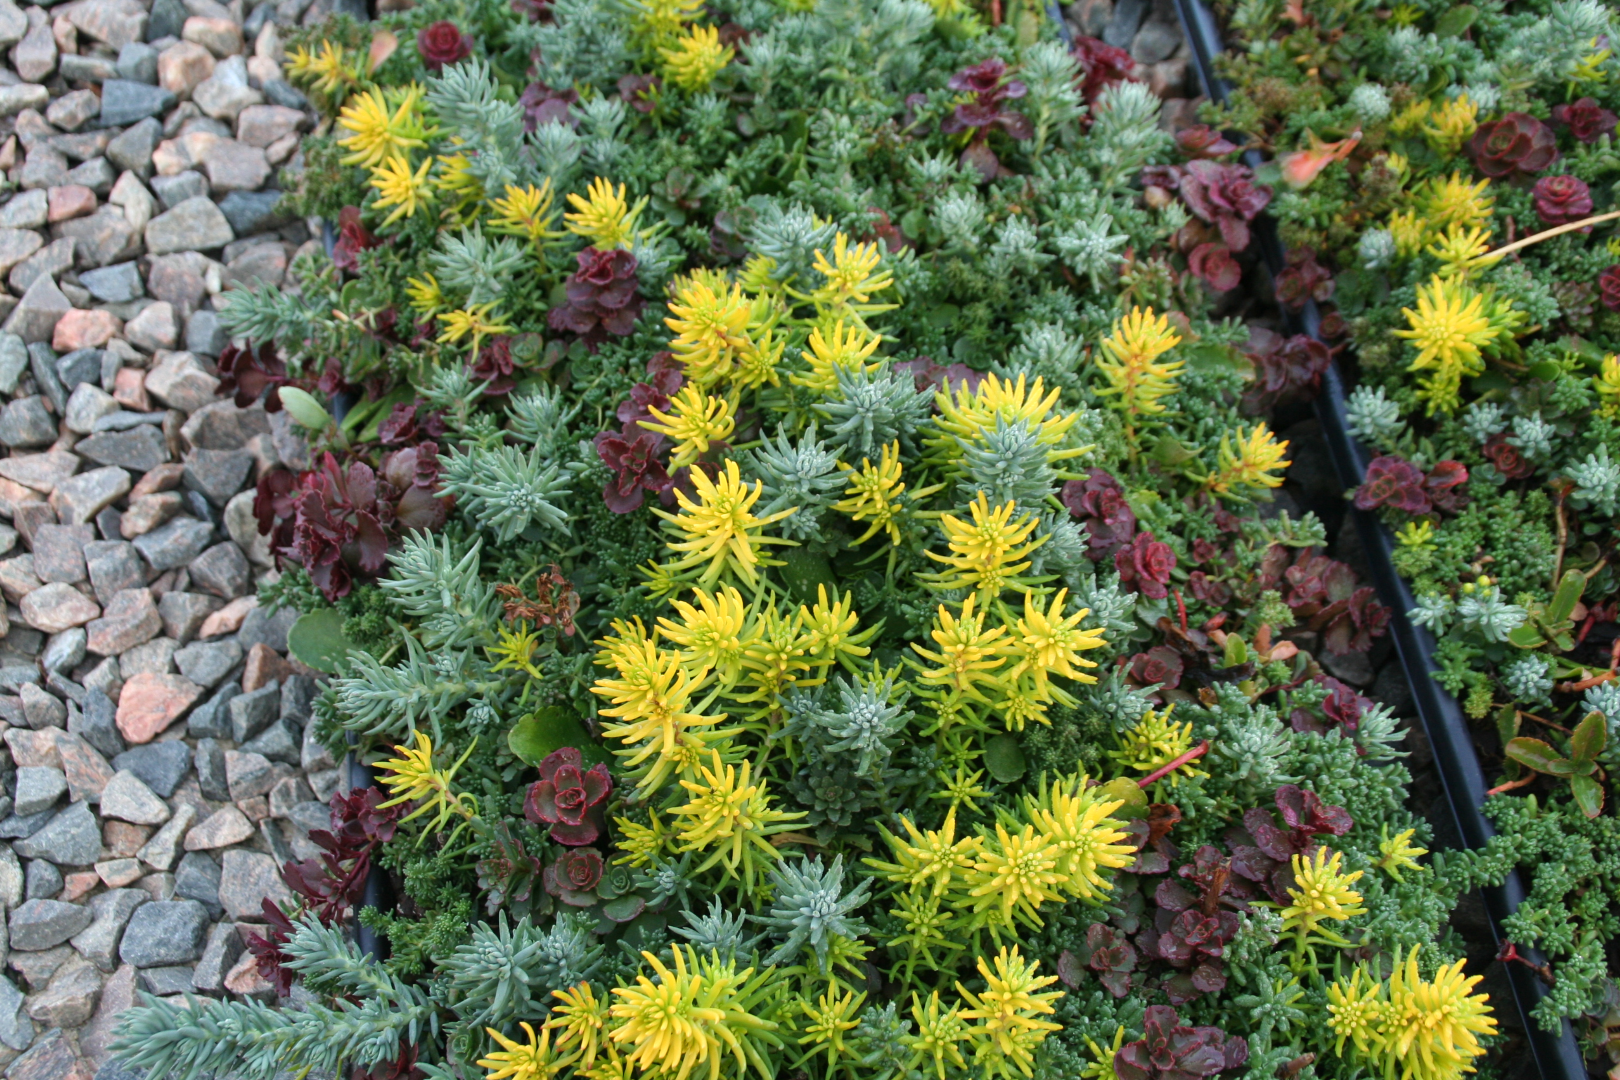 Planting sedum and other care tips for the sedum